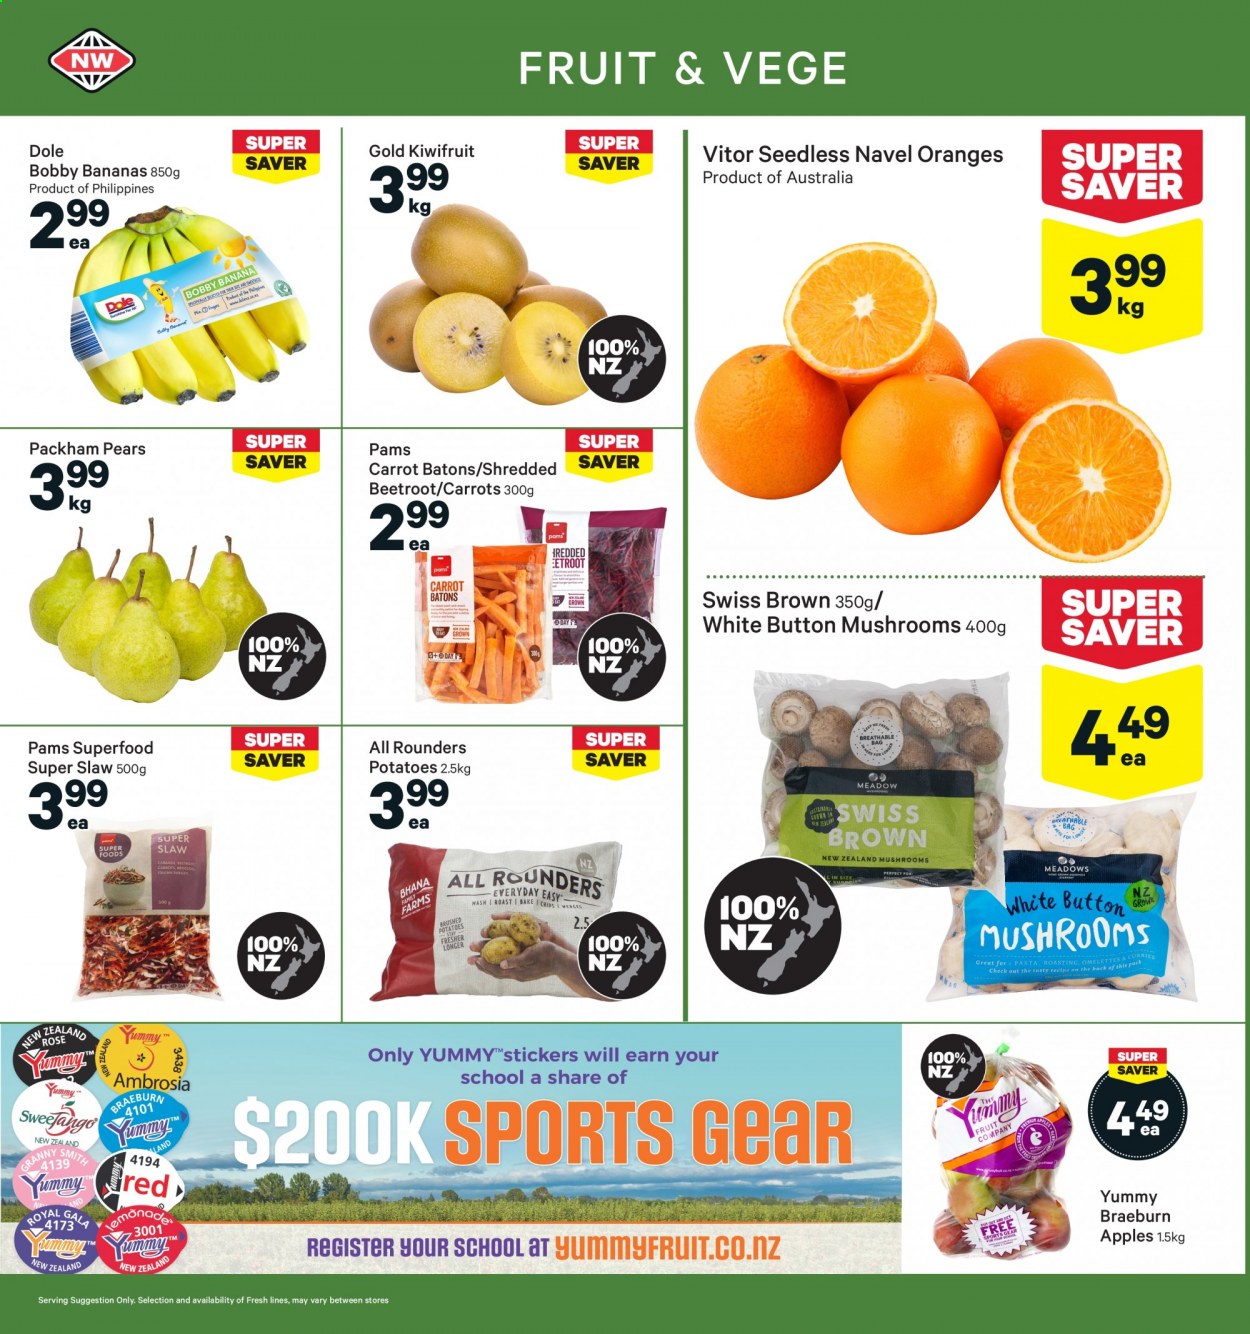 thumbnail - New World mailer - 28.06.2021 - 04.07.2021 - Sales products - potatoes, Dole, bananas, Gala, kiwi, pears, oranges, apples, Granny Smith, navel oranges, pasta, wine, rosé wine. Page 10.